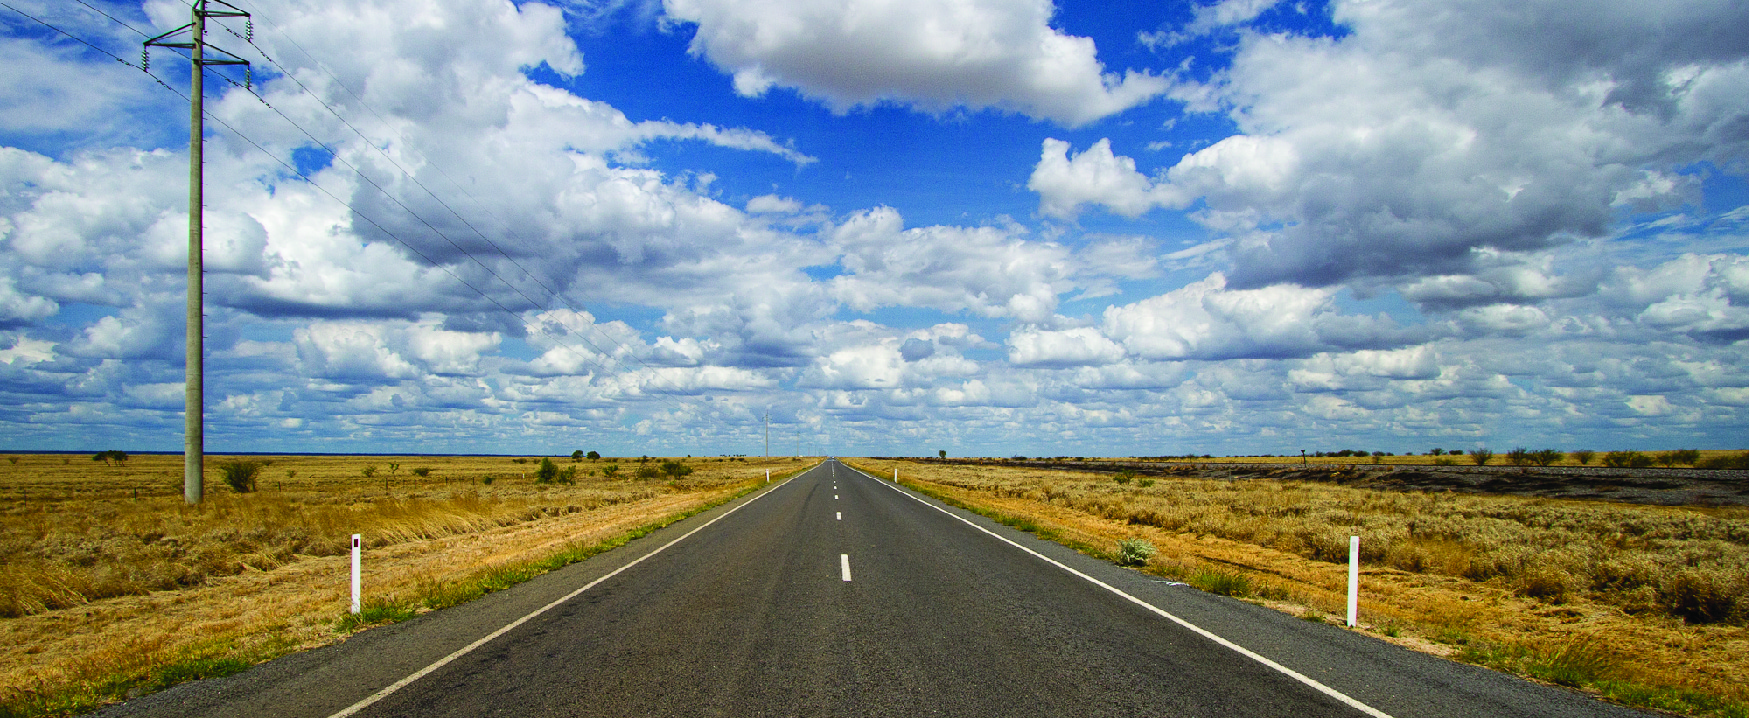 This image looks down the middle of an open road with clouds in the sky and open landscape on either side of the road.